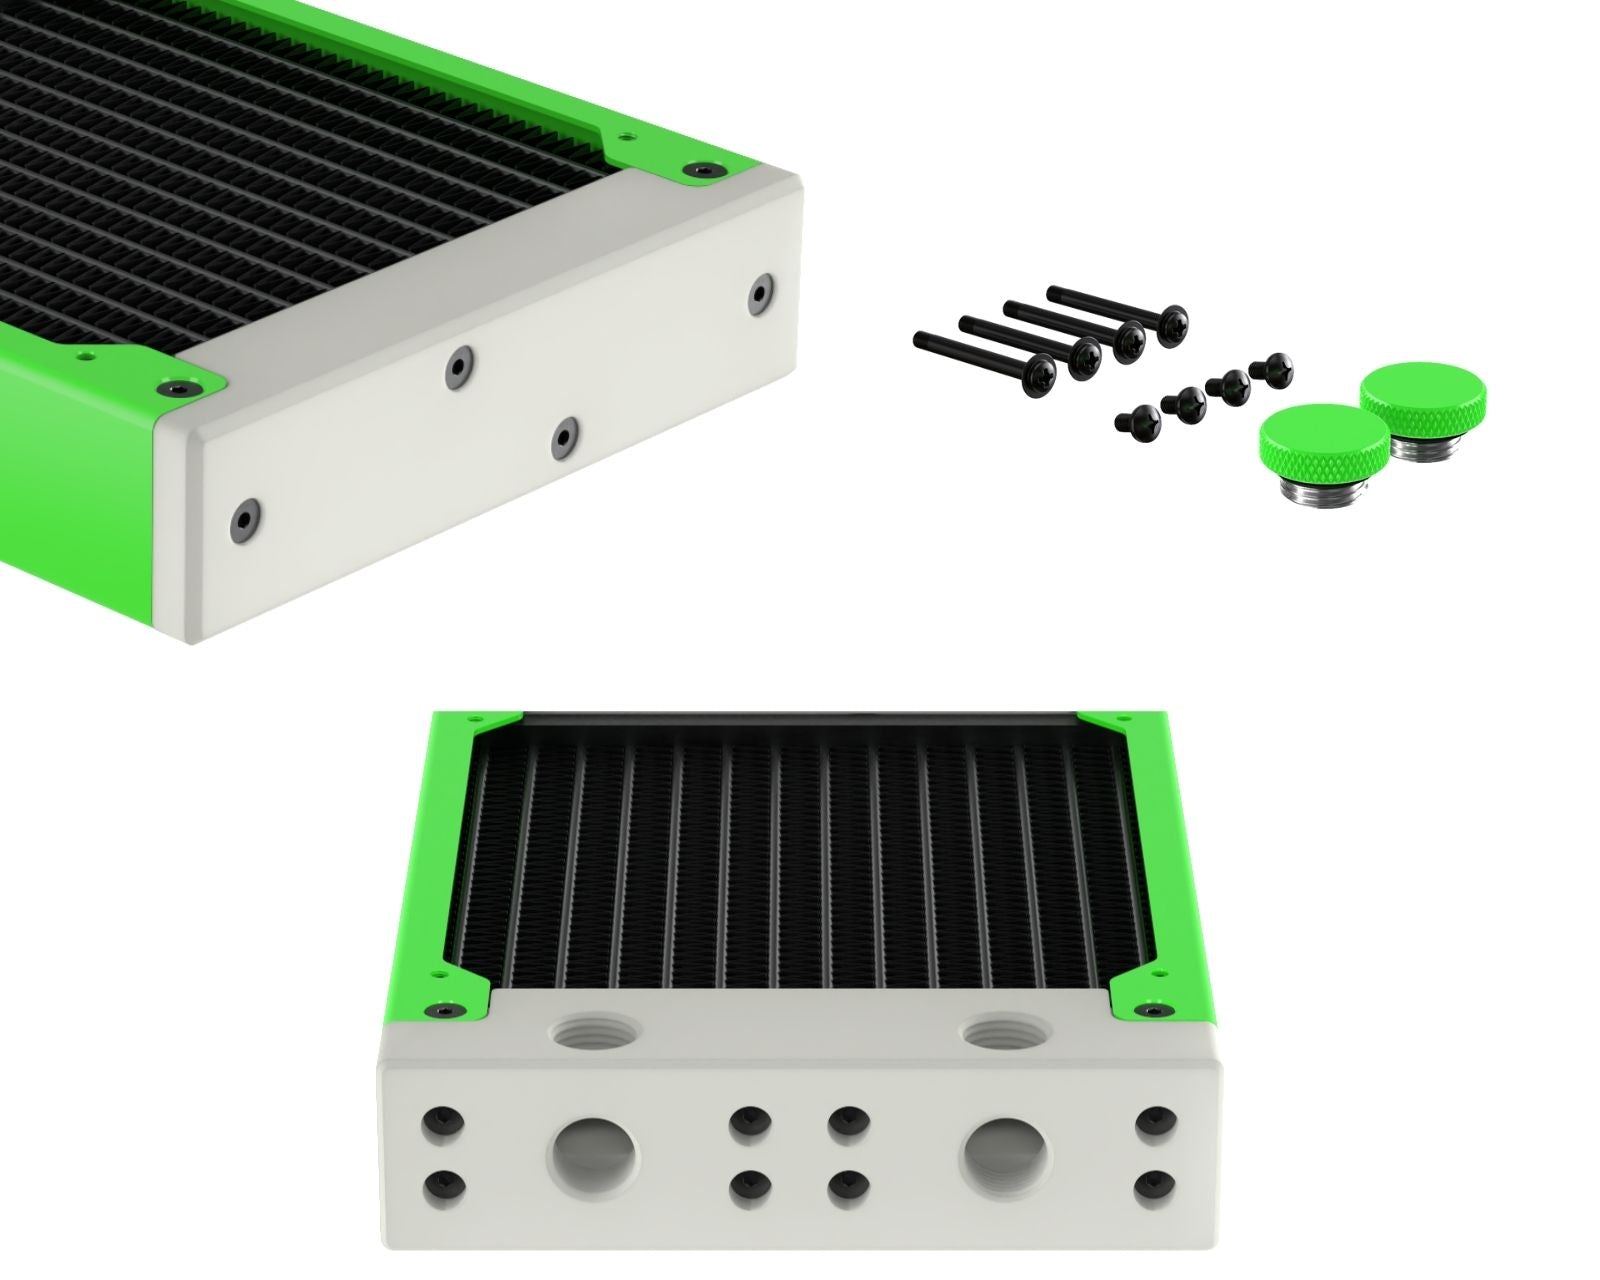 PrimoChill 120SL (30mm) EXIMO Modular Radiator, White POM, 1x120mm, Single Fan (R-SL-W12) Available in 20+ Colors, Assembled in USA and Custom Watercooling Loop Ready - UV Green